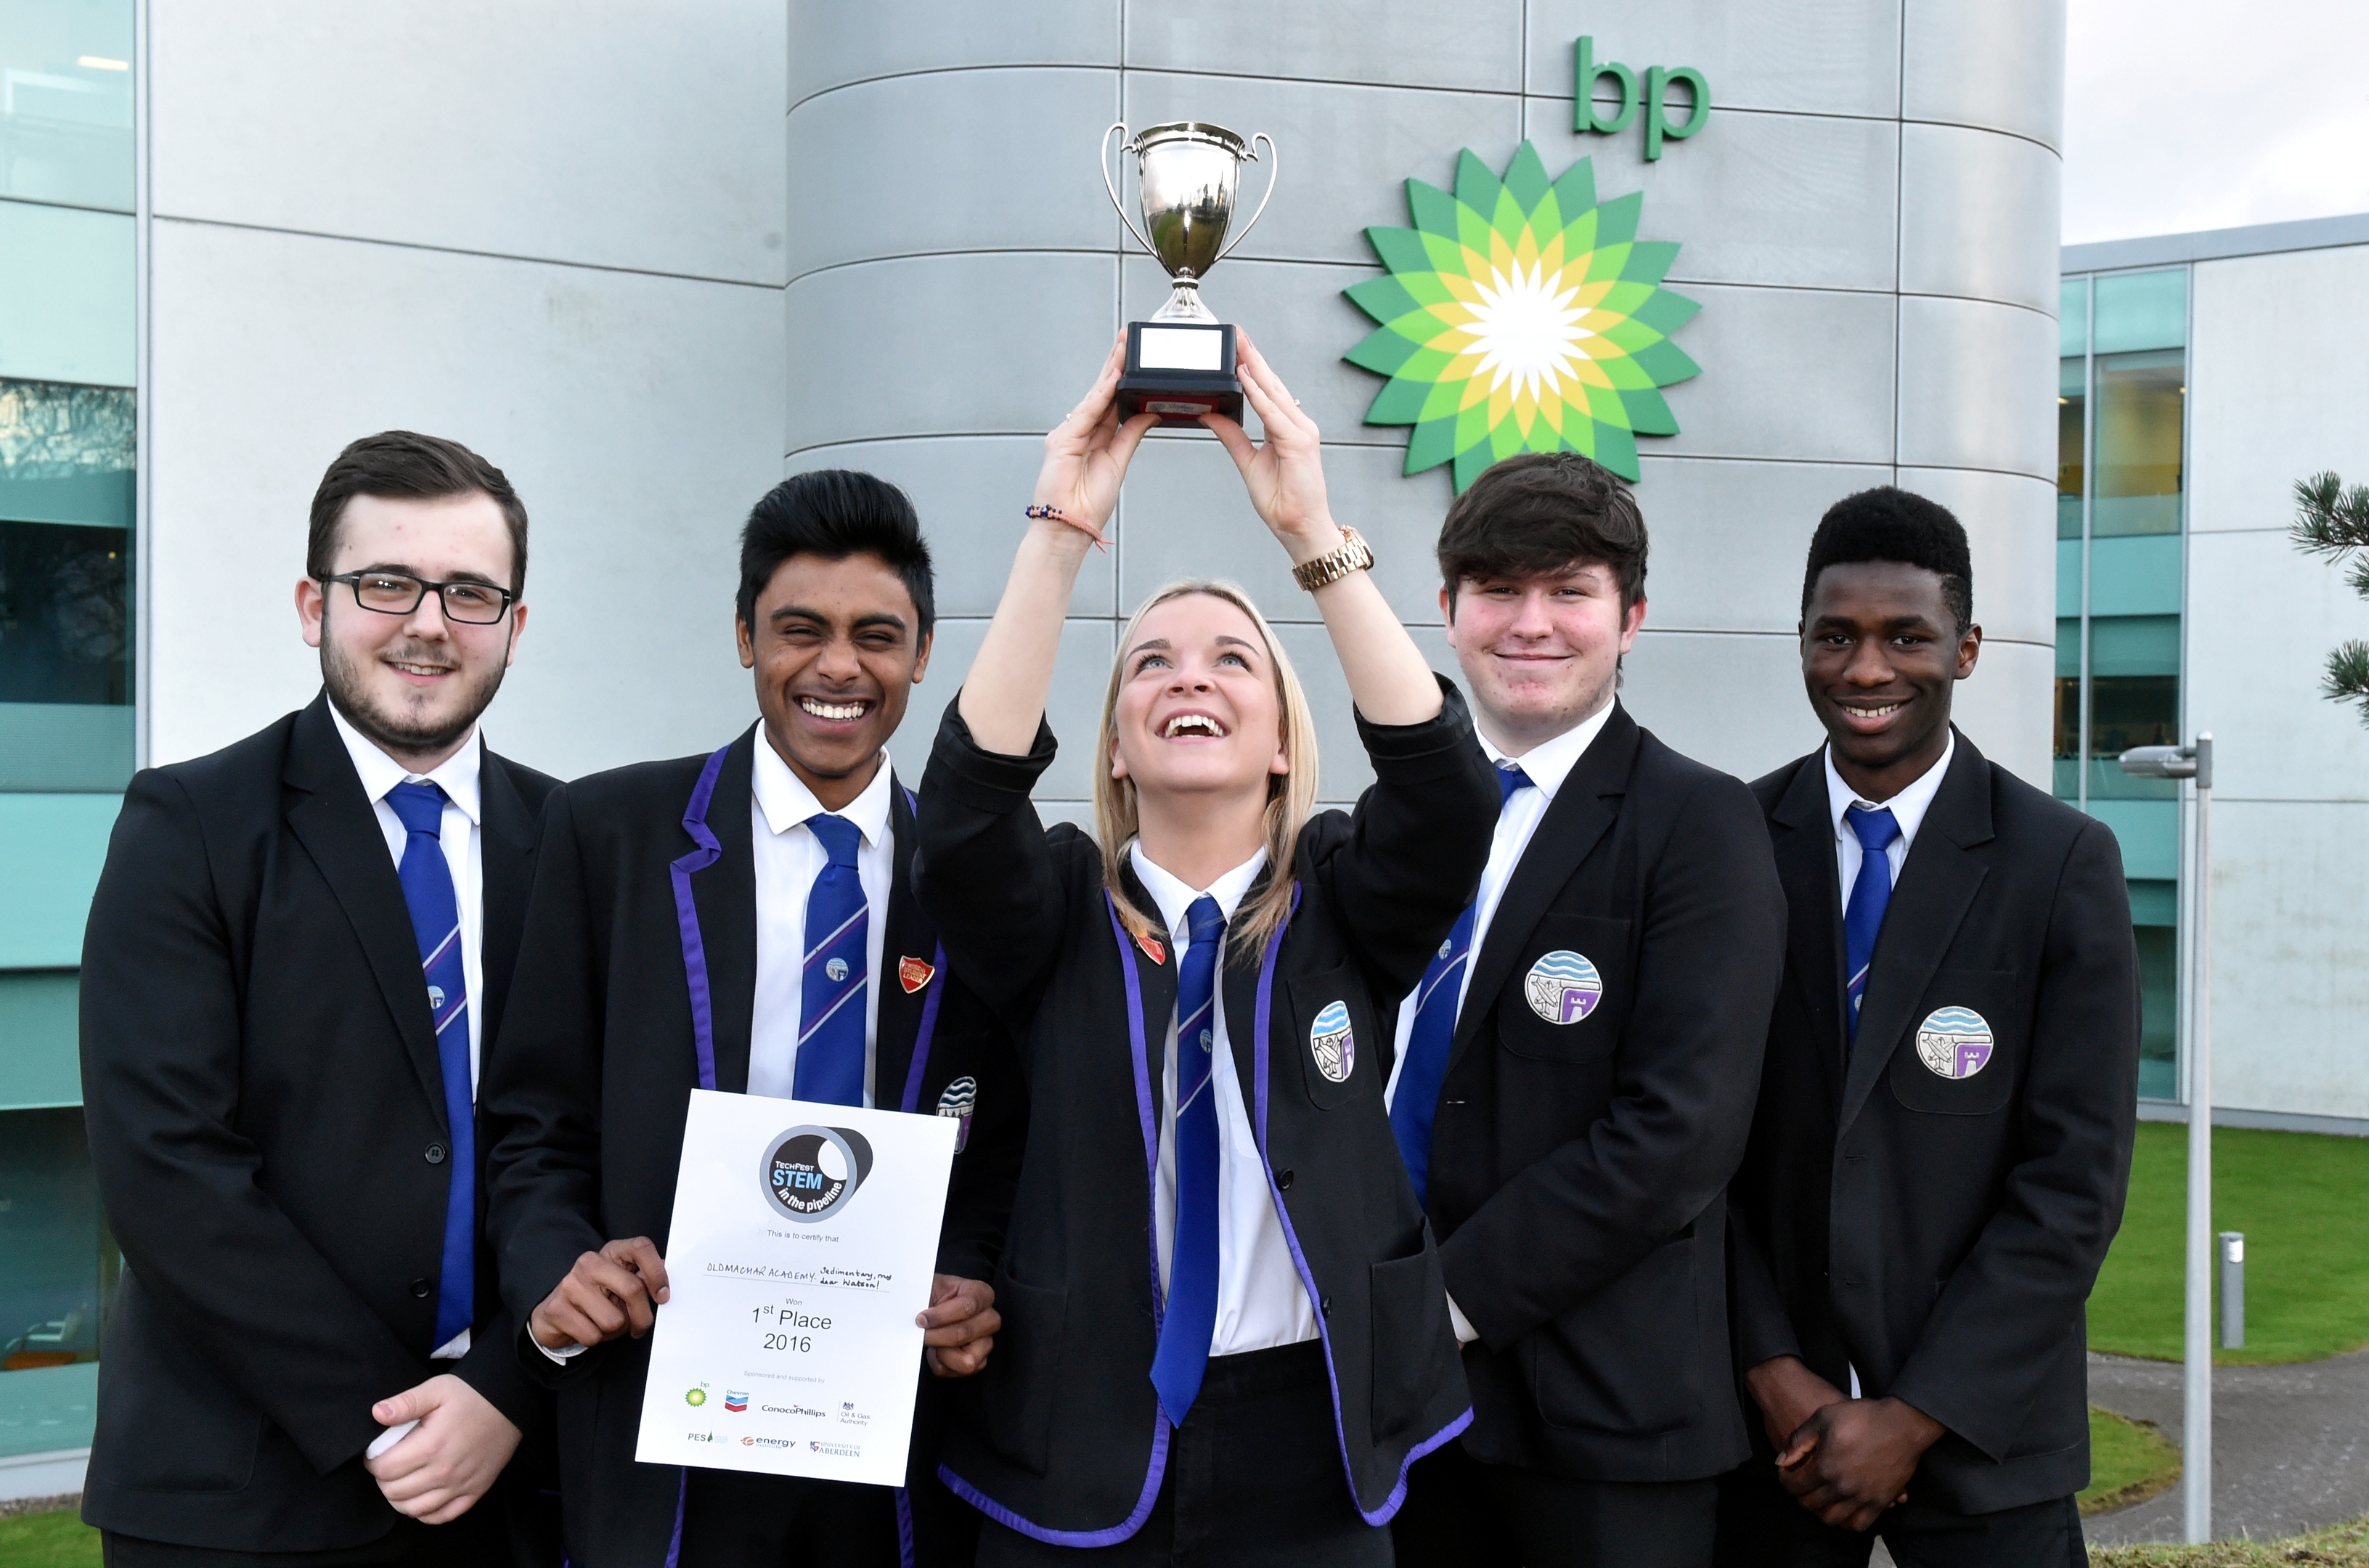 Winners of the Oil and Gas Challenge held at BP were Oldmachar Academy. Pupils (from left) Kieran Mann, Likhit Macharla, Chloe Gibb, James Low and Joseph Brown.